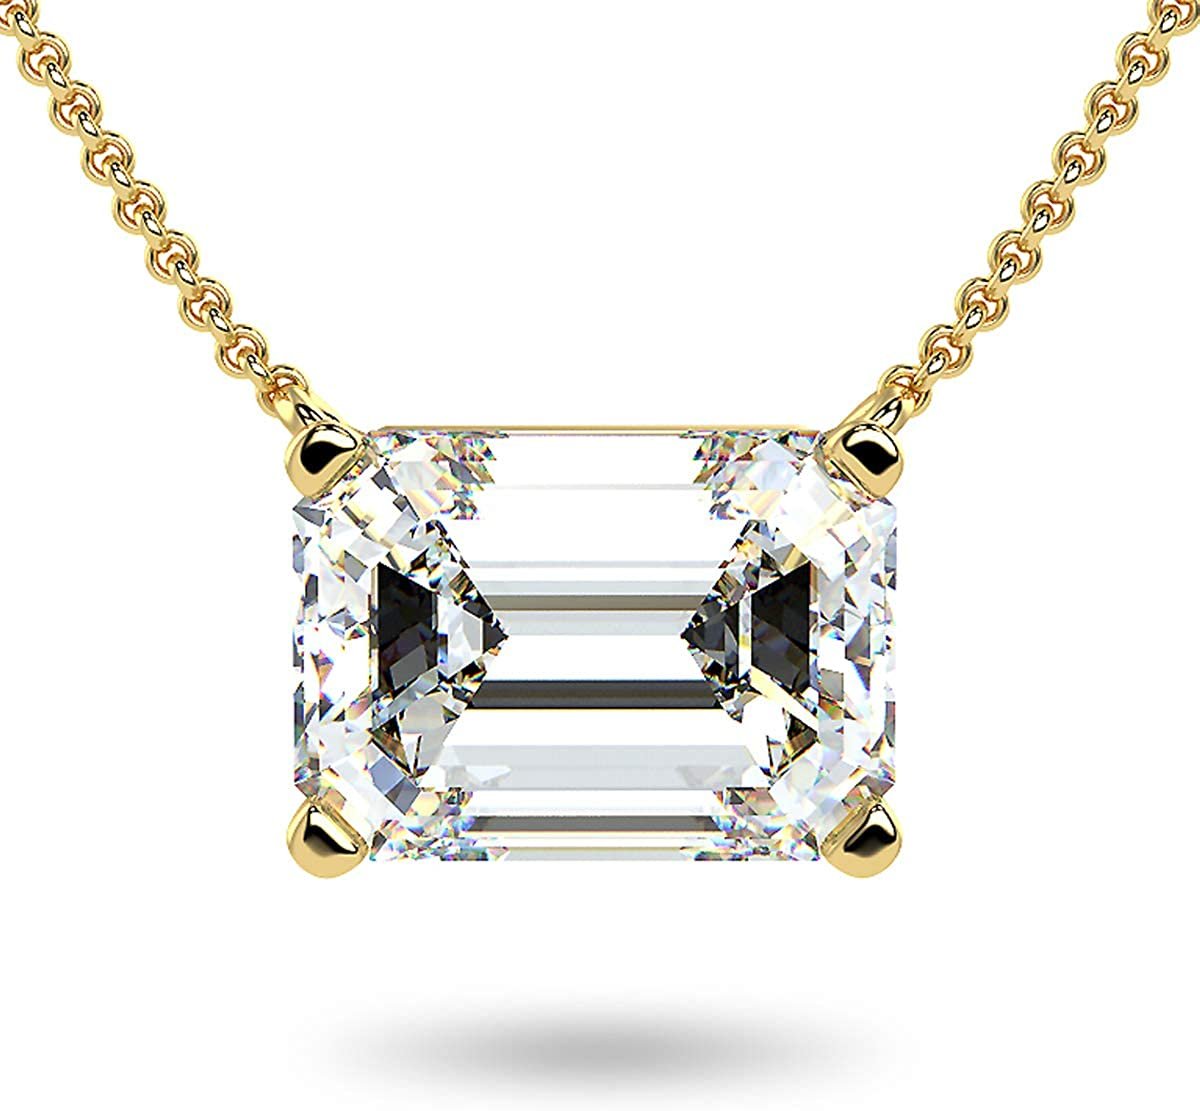 LÚDERE 14K Gold Angular Pendant Necklace Lined with Diamond or White Sapphire Mirror Pave on A 1mm Rolo Chain Diamond